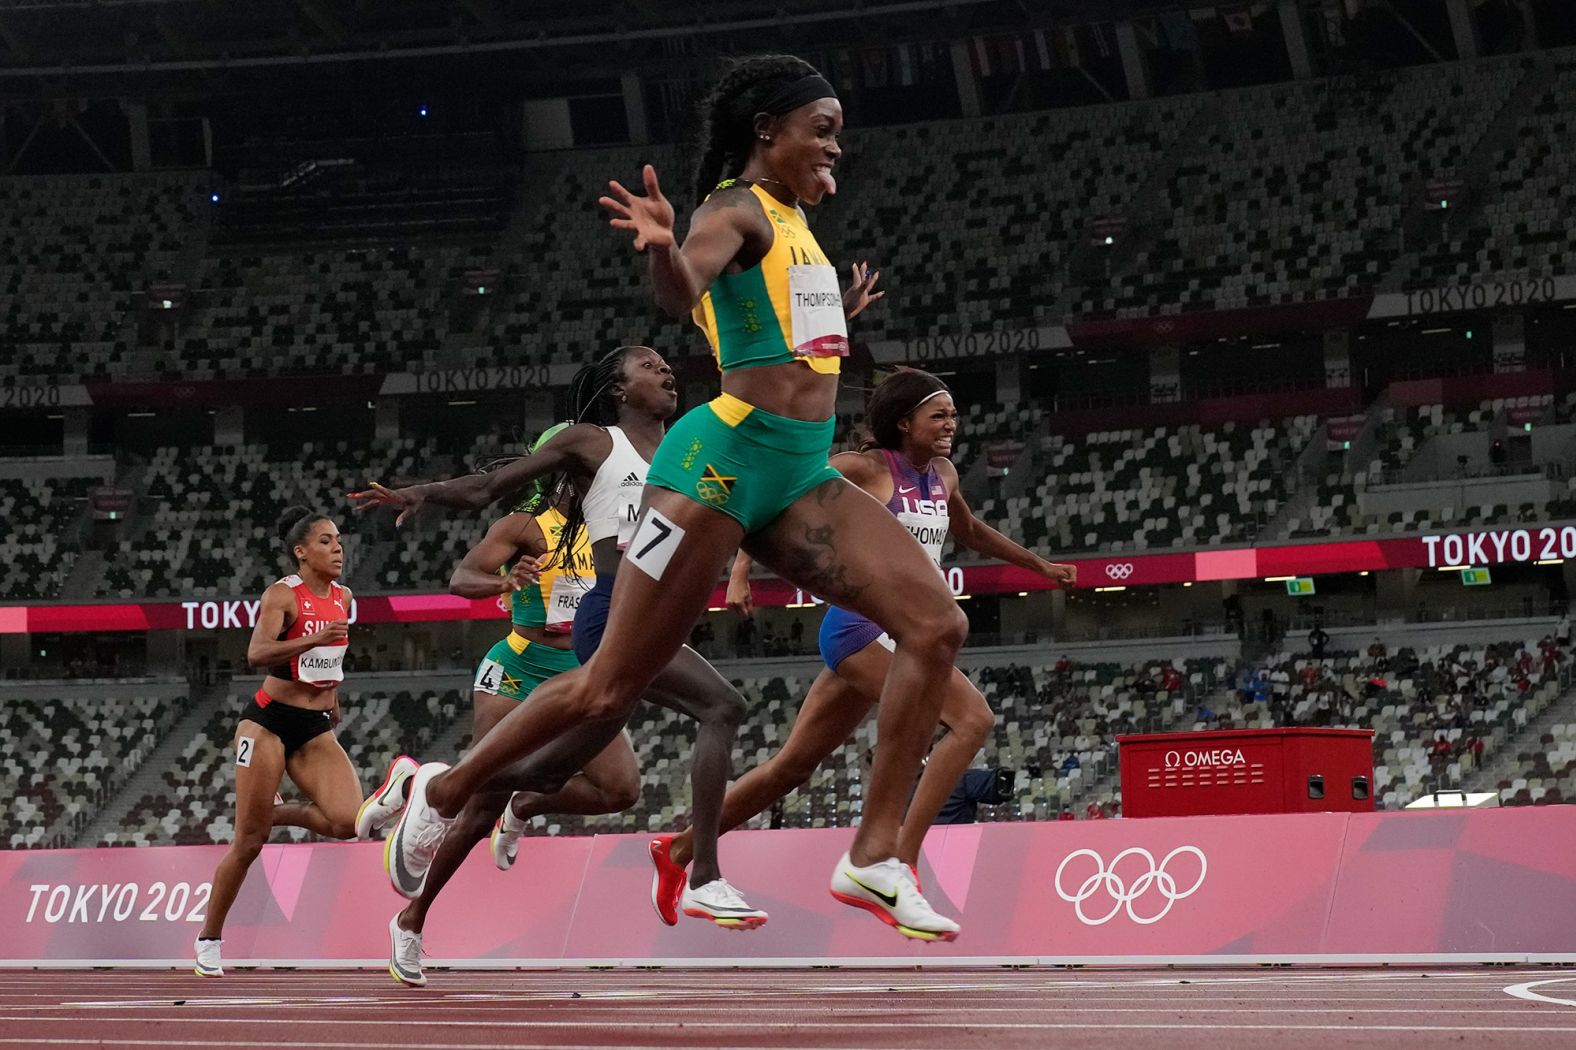 Jamaica's Elaine Thompson-Herah reacts <a href="index.php?page=&url=https%3A%2F%2Fwww.cnn.com%2Fworld%2Flive-news%2Ftokyo-2020-olympics-08-03-21-spt%2Fh_bf3e0de4ba9674243fe29a8b449e5c1b" target="_blank">after defending her crown </a>in the 200 meters on August 3. She also won gold in the 100 meters on Saturday. She's the first-ever woman to win the 100 and 200 double at consecutive Olympic Games.